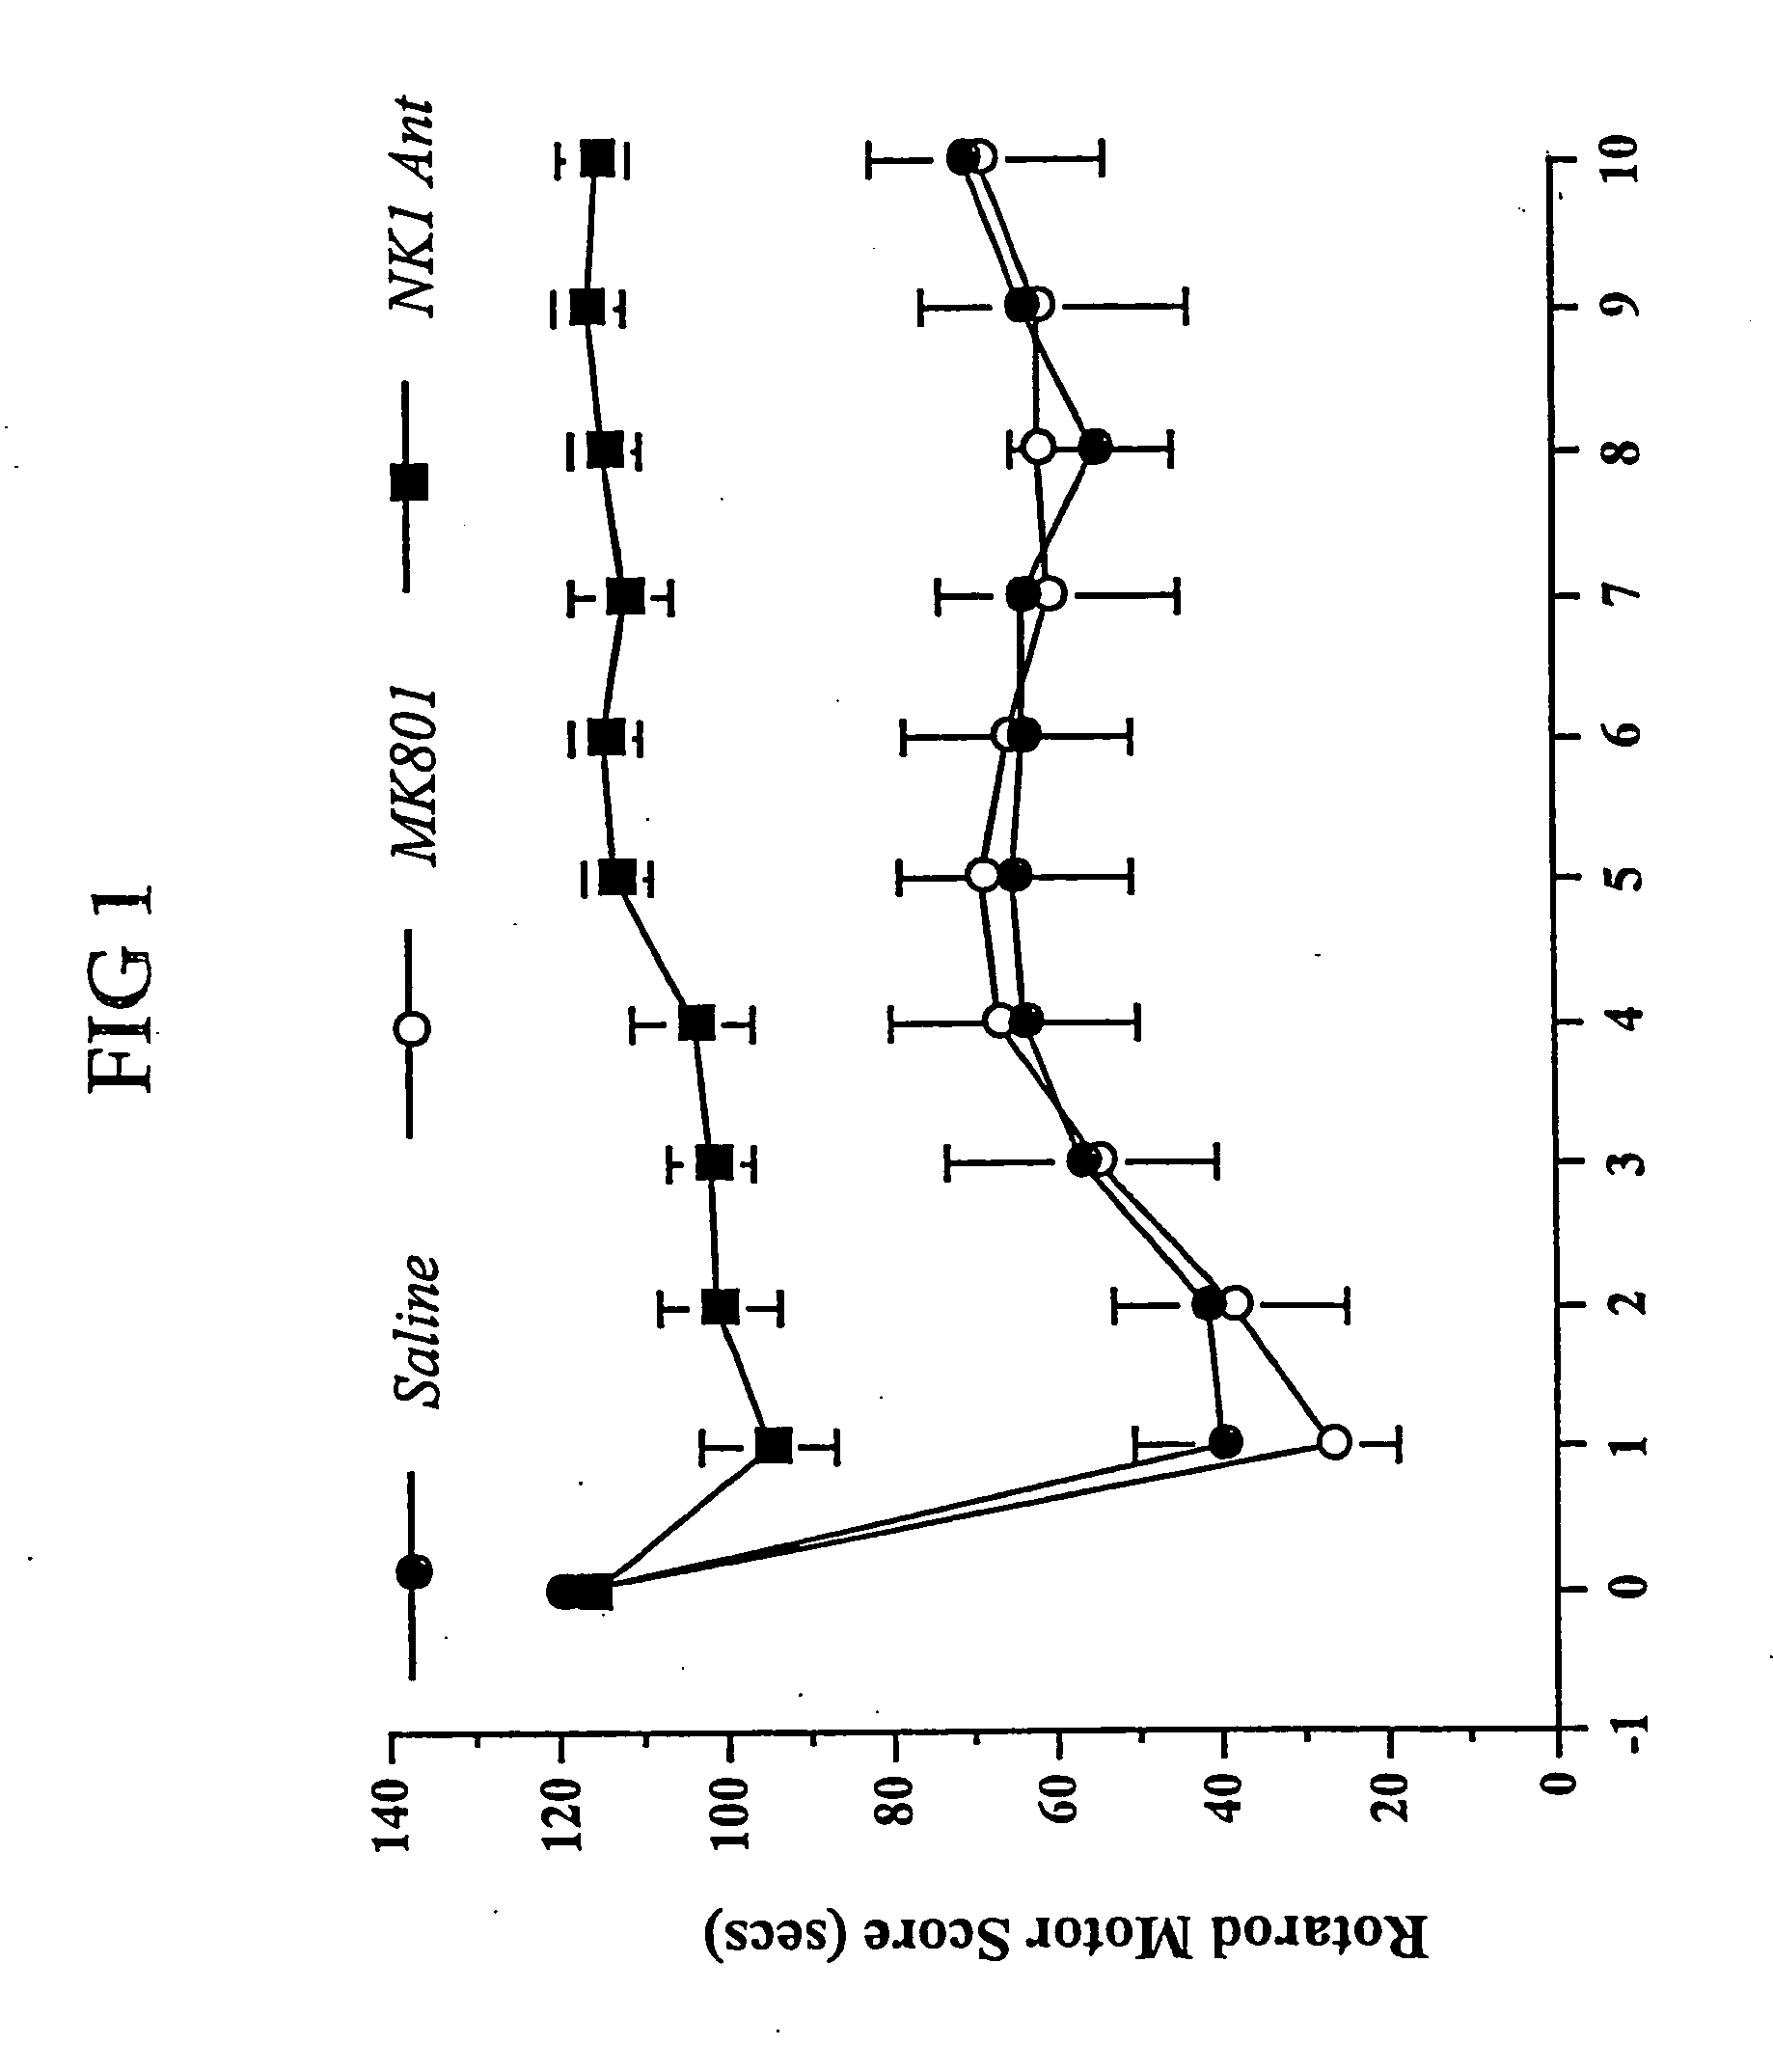 Method of treatment and/or prevention of brain, spinal or nerve injury